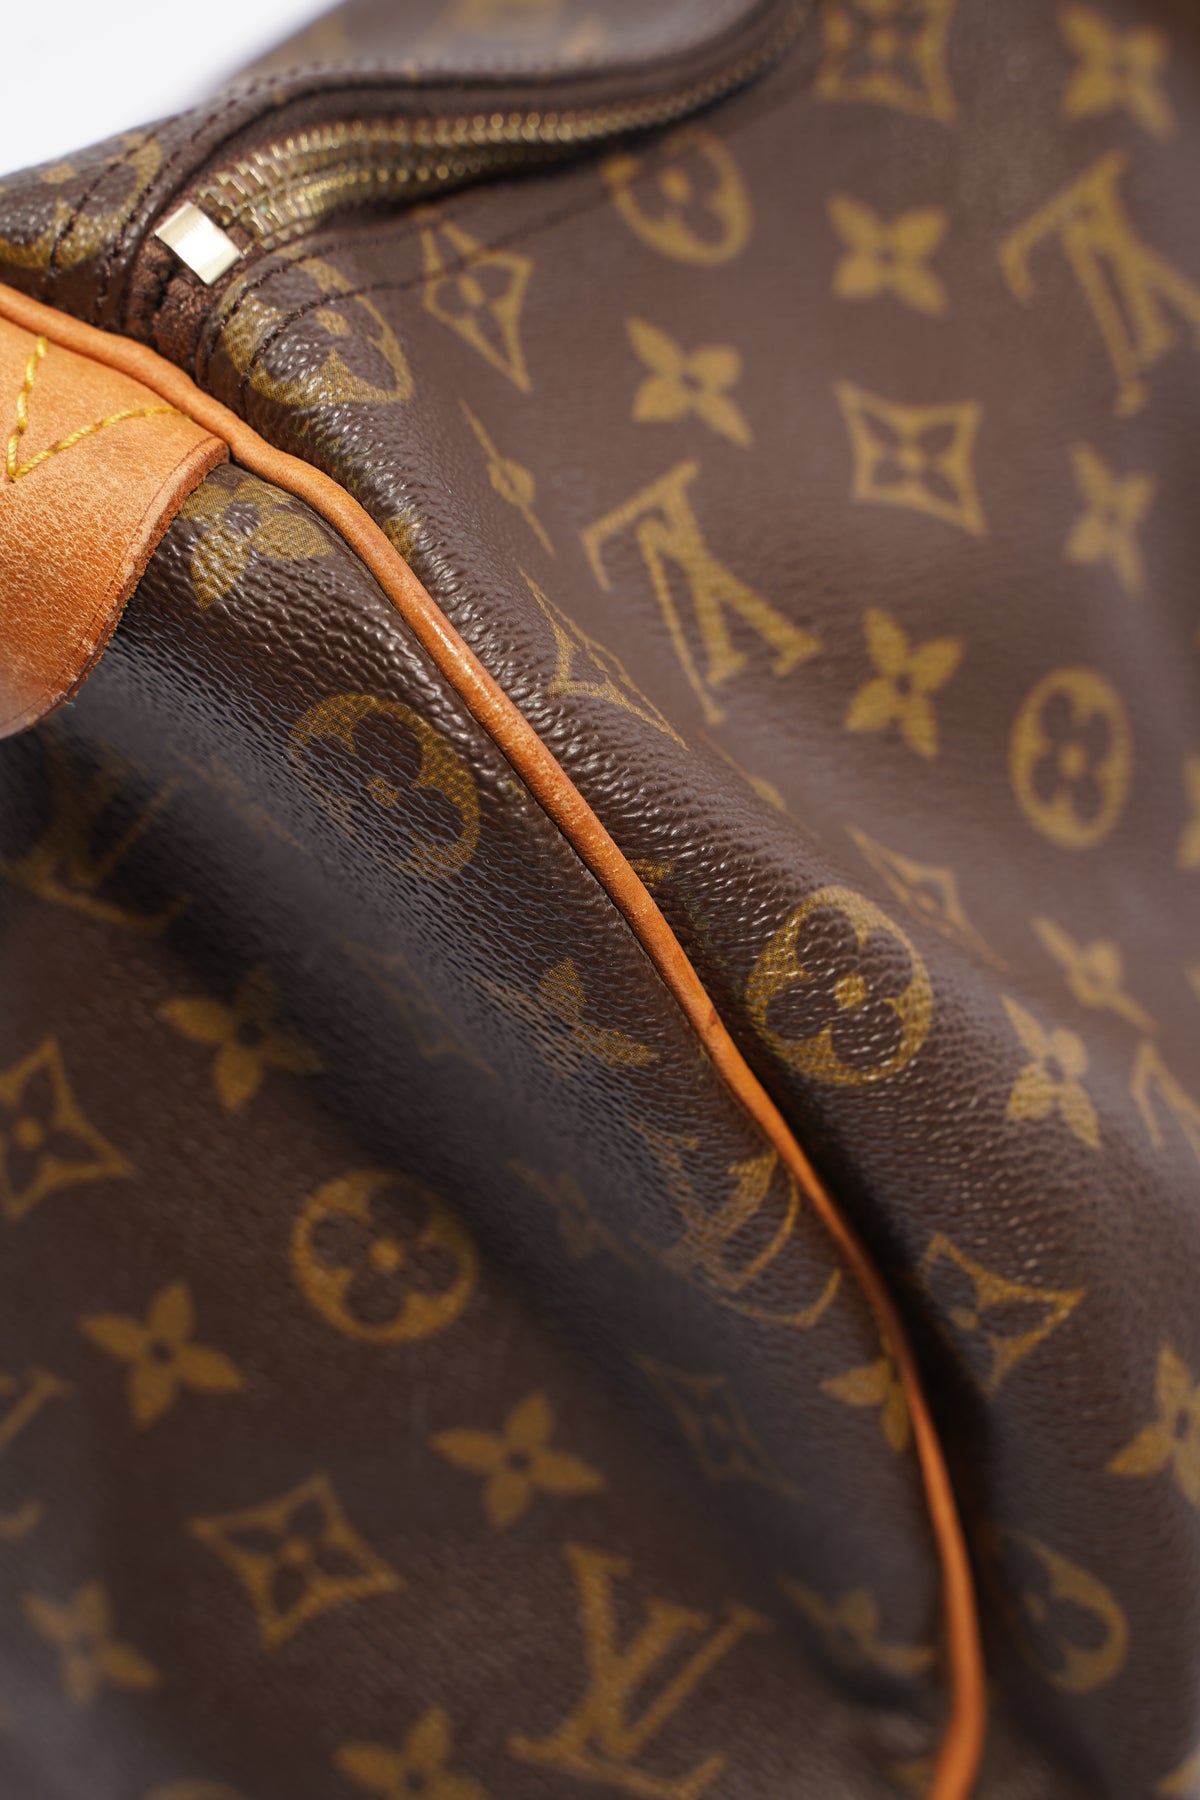 Louis Vuitton Nomade Keepall 50. On website search for AO27187